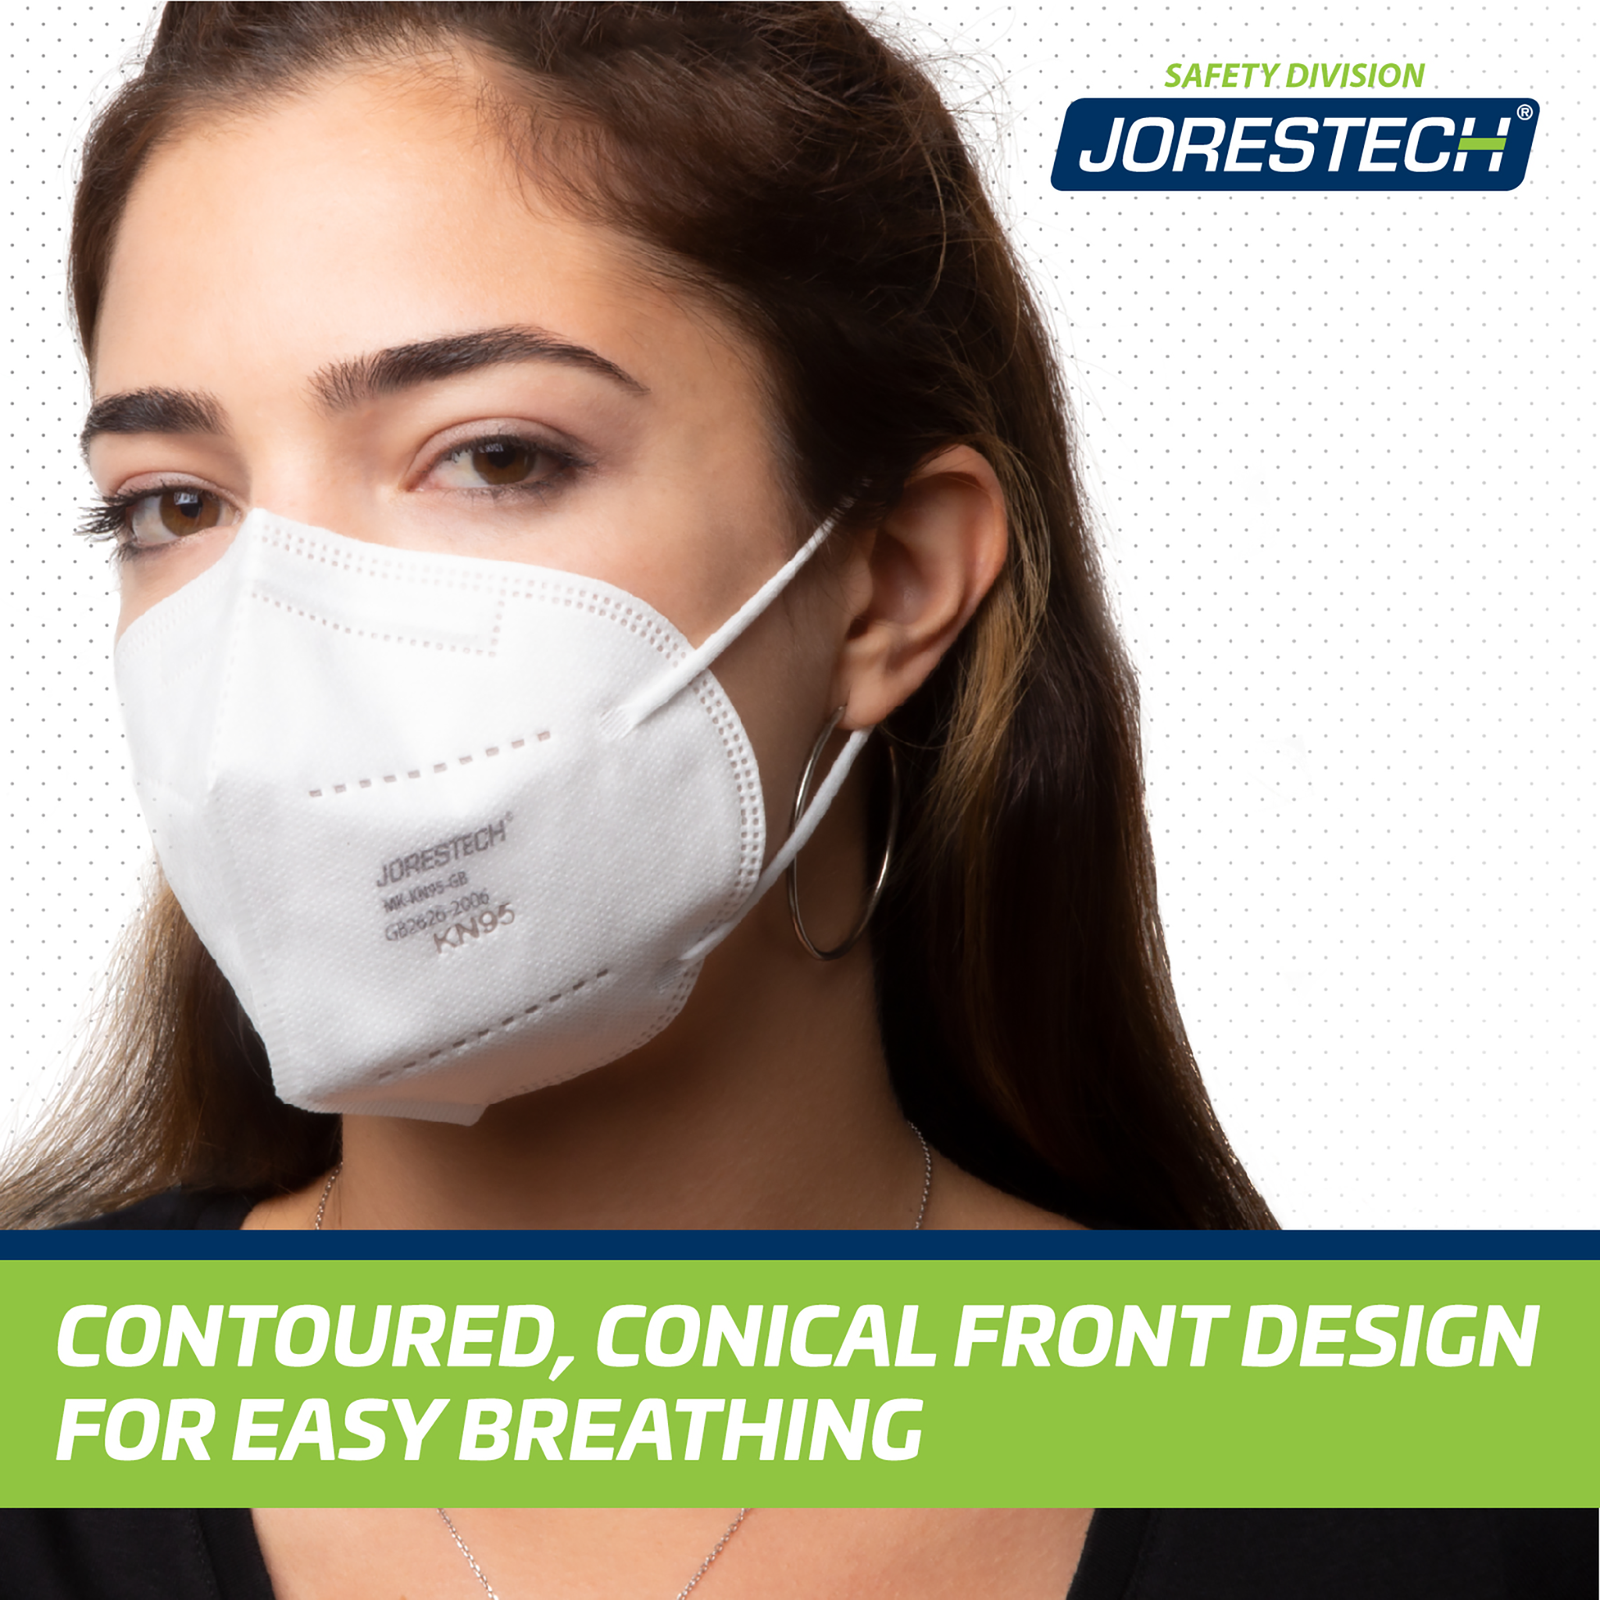 Woman wearing a safety mask and an icon that has a text that reads: ergonomic design. Contoured, conical front design for easy breathing